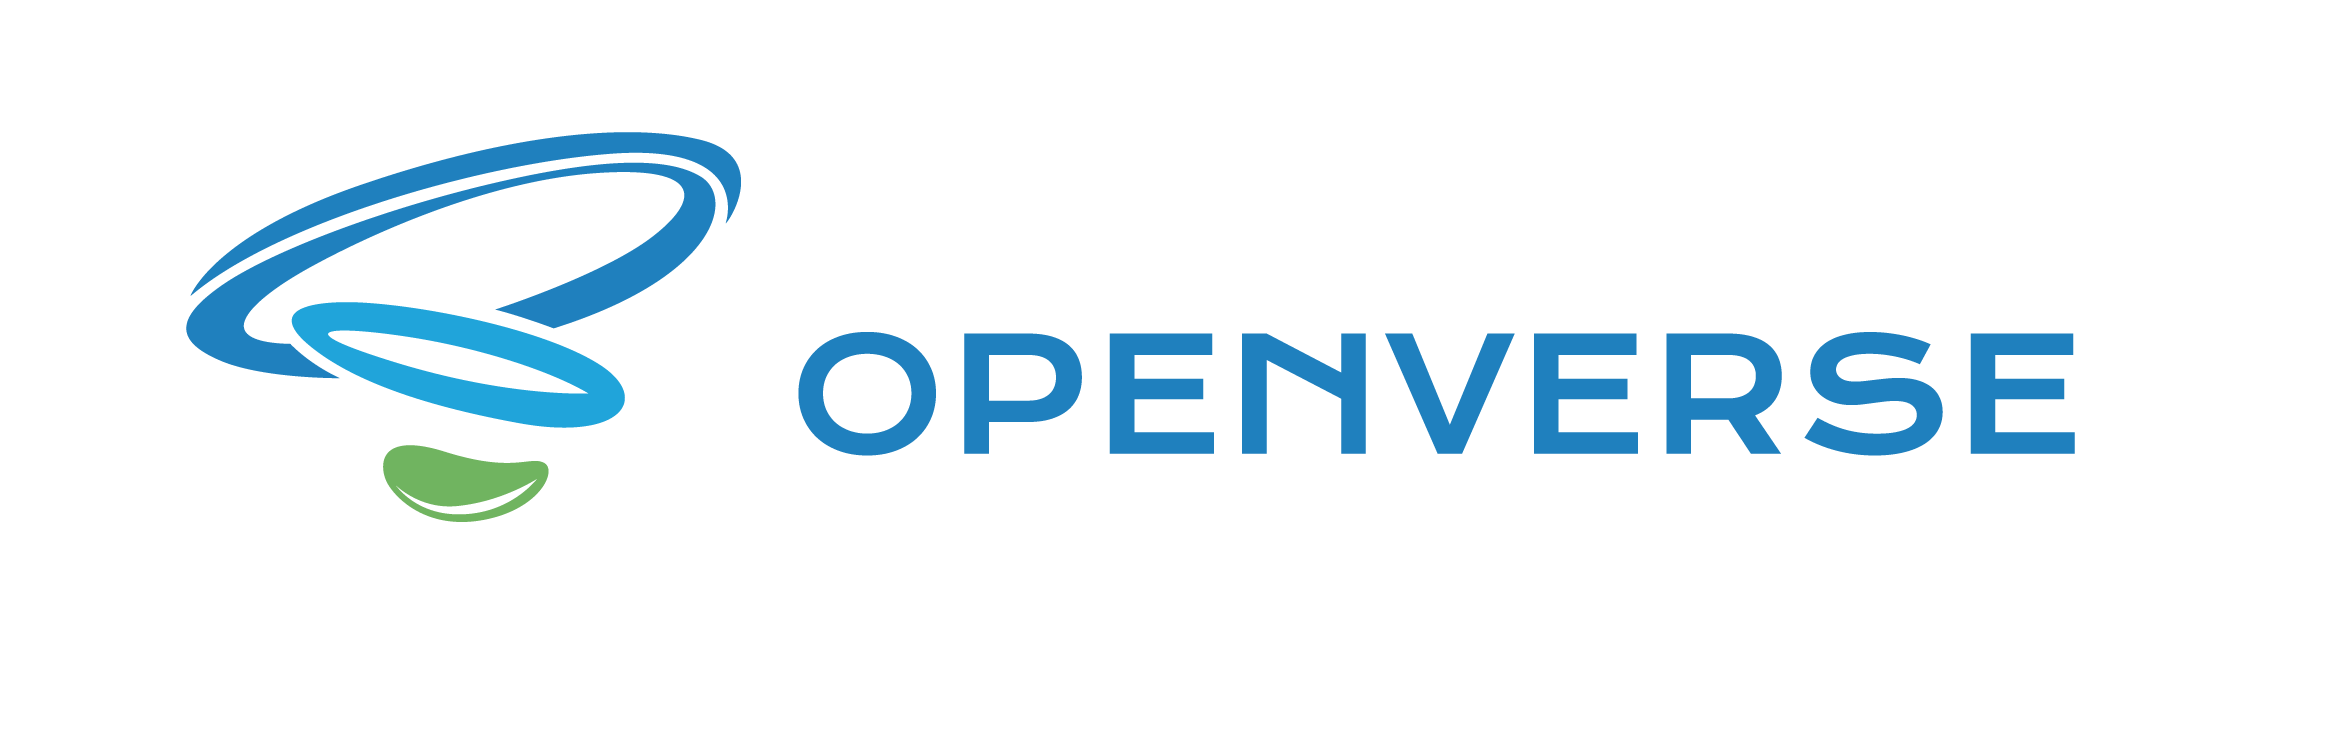 Amber Group Announces Q3 2022 Launch Of Openverse, The Gateway Into The Metaverse